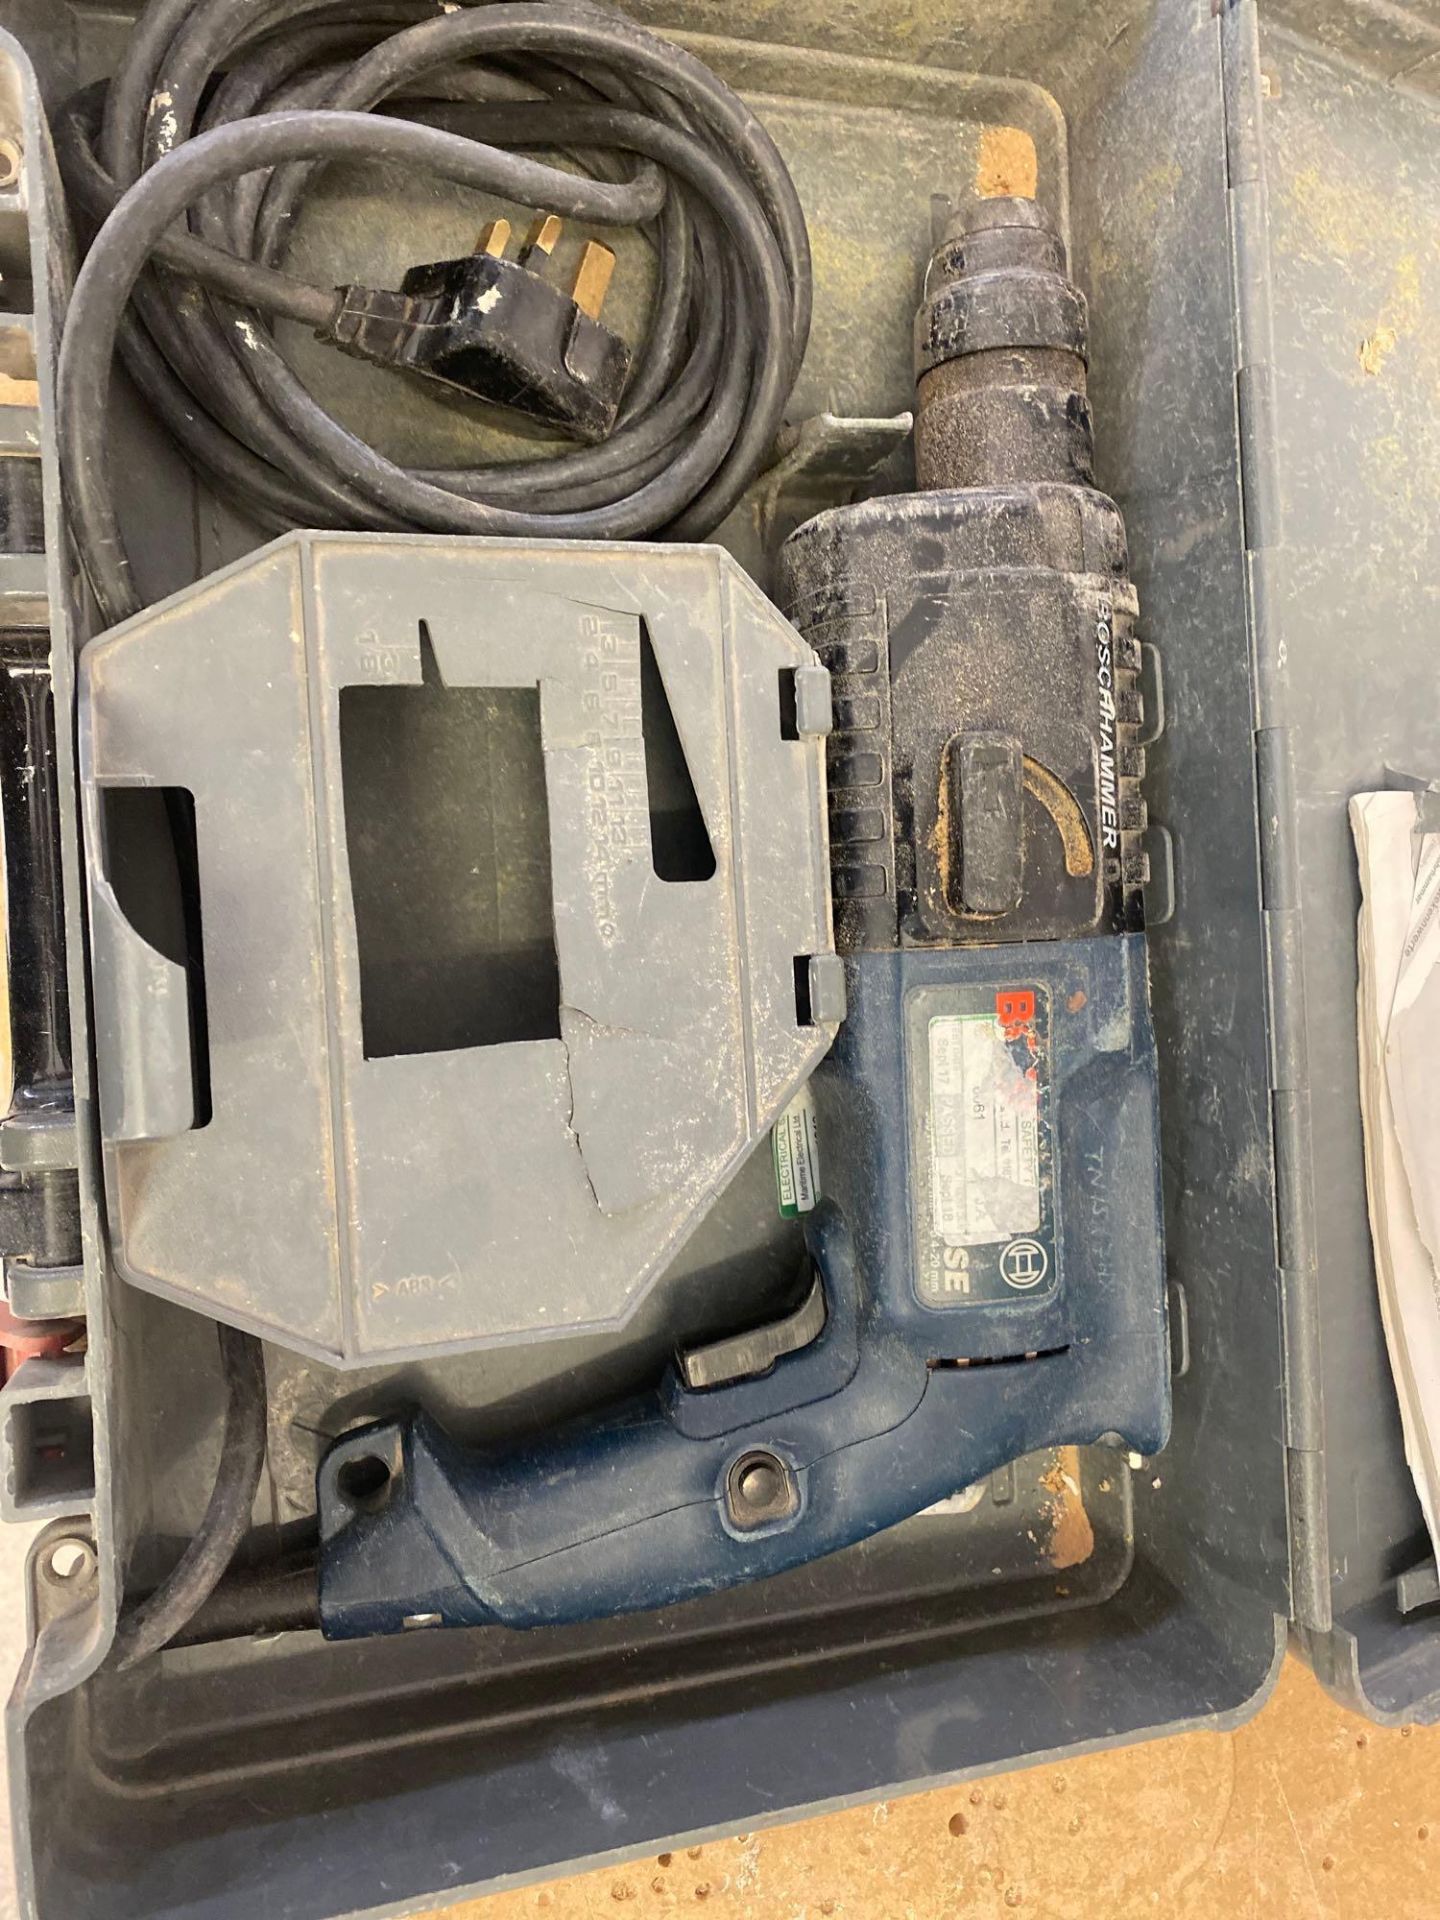 Bosch GBH 2–20 SE SDS hammer drill 240v complete with carry case - Image 2 of 4